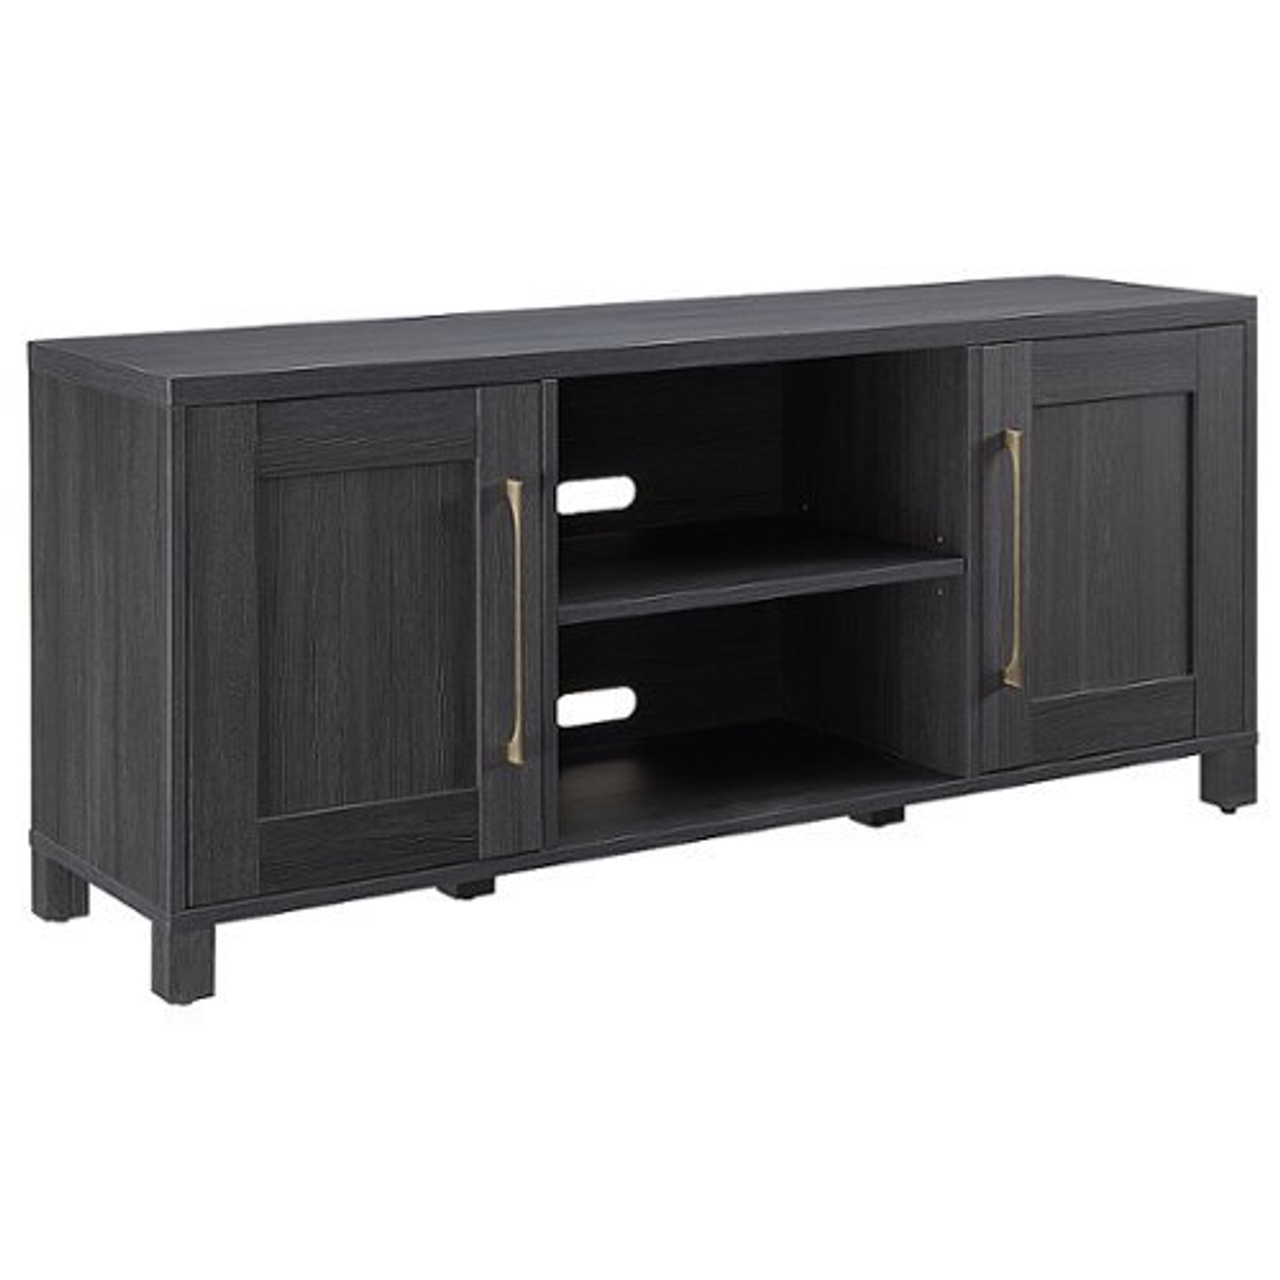 Camden&Wells - Chabot TV Stand for TVs up to 65" - Charcoal Gray